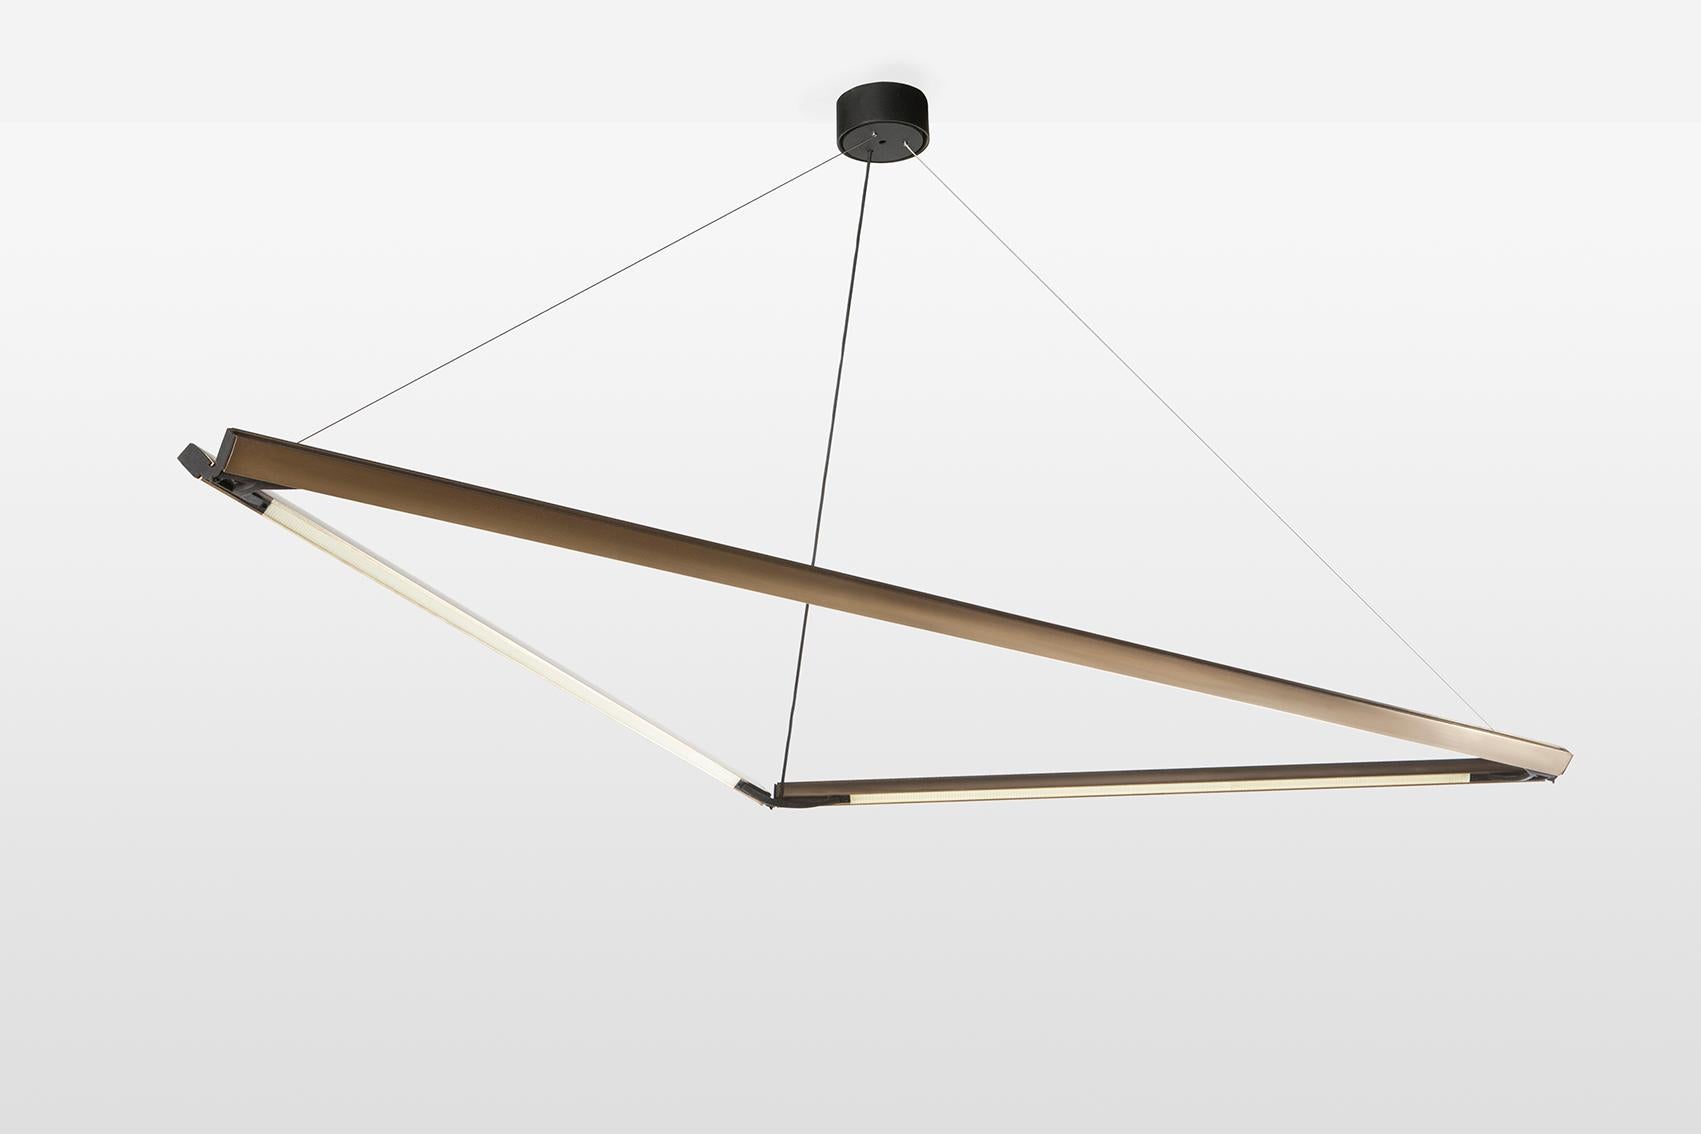 Highline 3D is an architectural lighting system with infinite possibilities. A custom brass extruded profile with inlaid LEDs creates the foundation for a variety of geometric volumes. The 3D_01 version is an obtuse triangle that looks visually